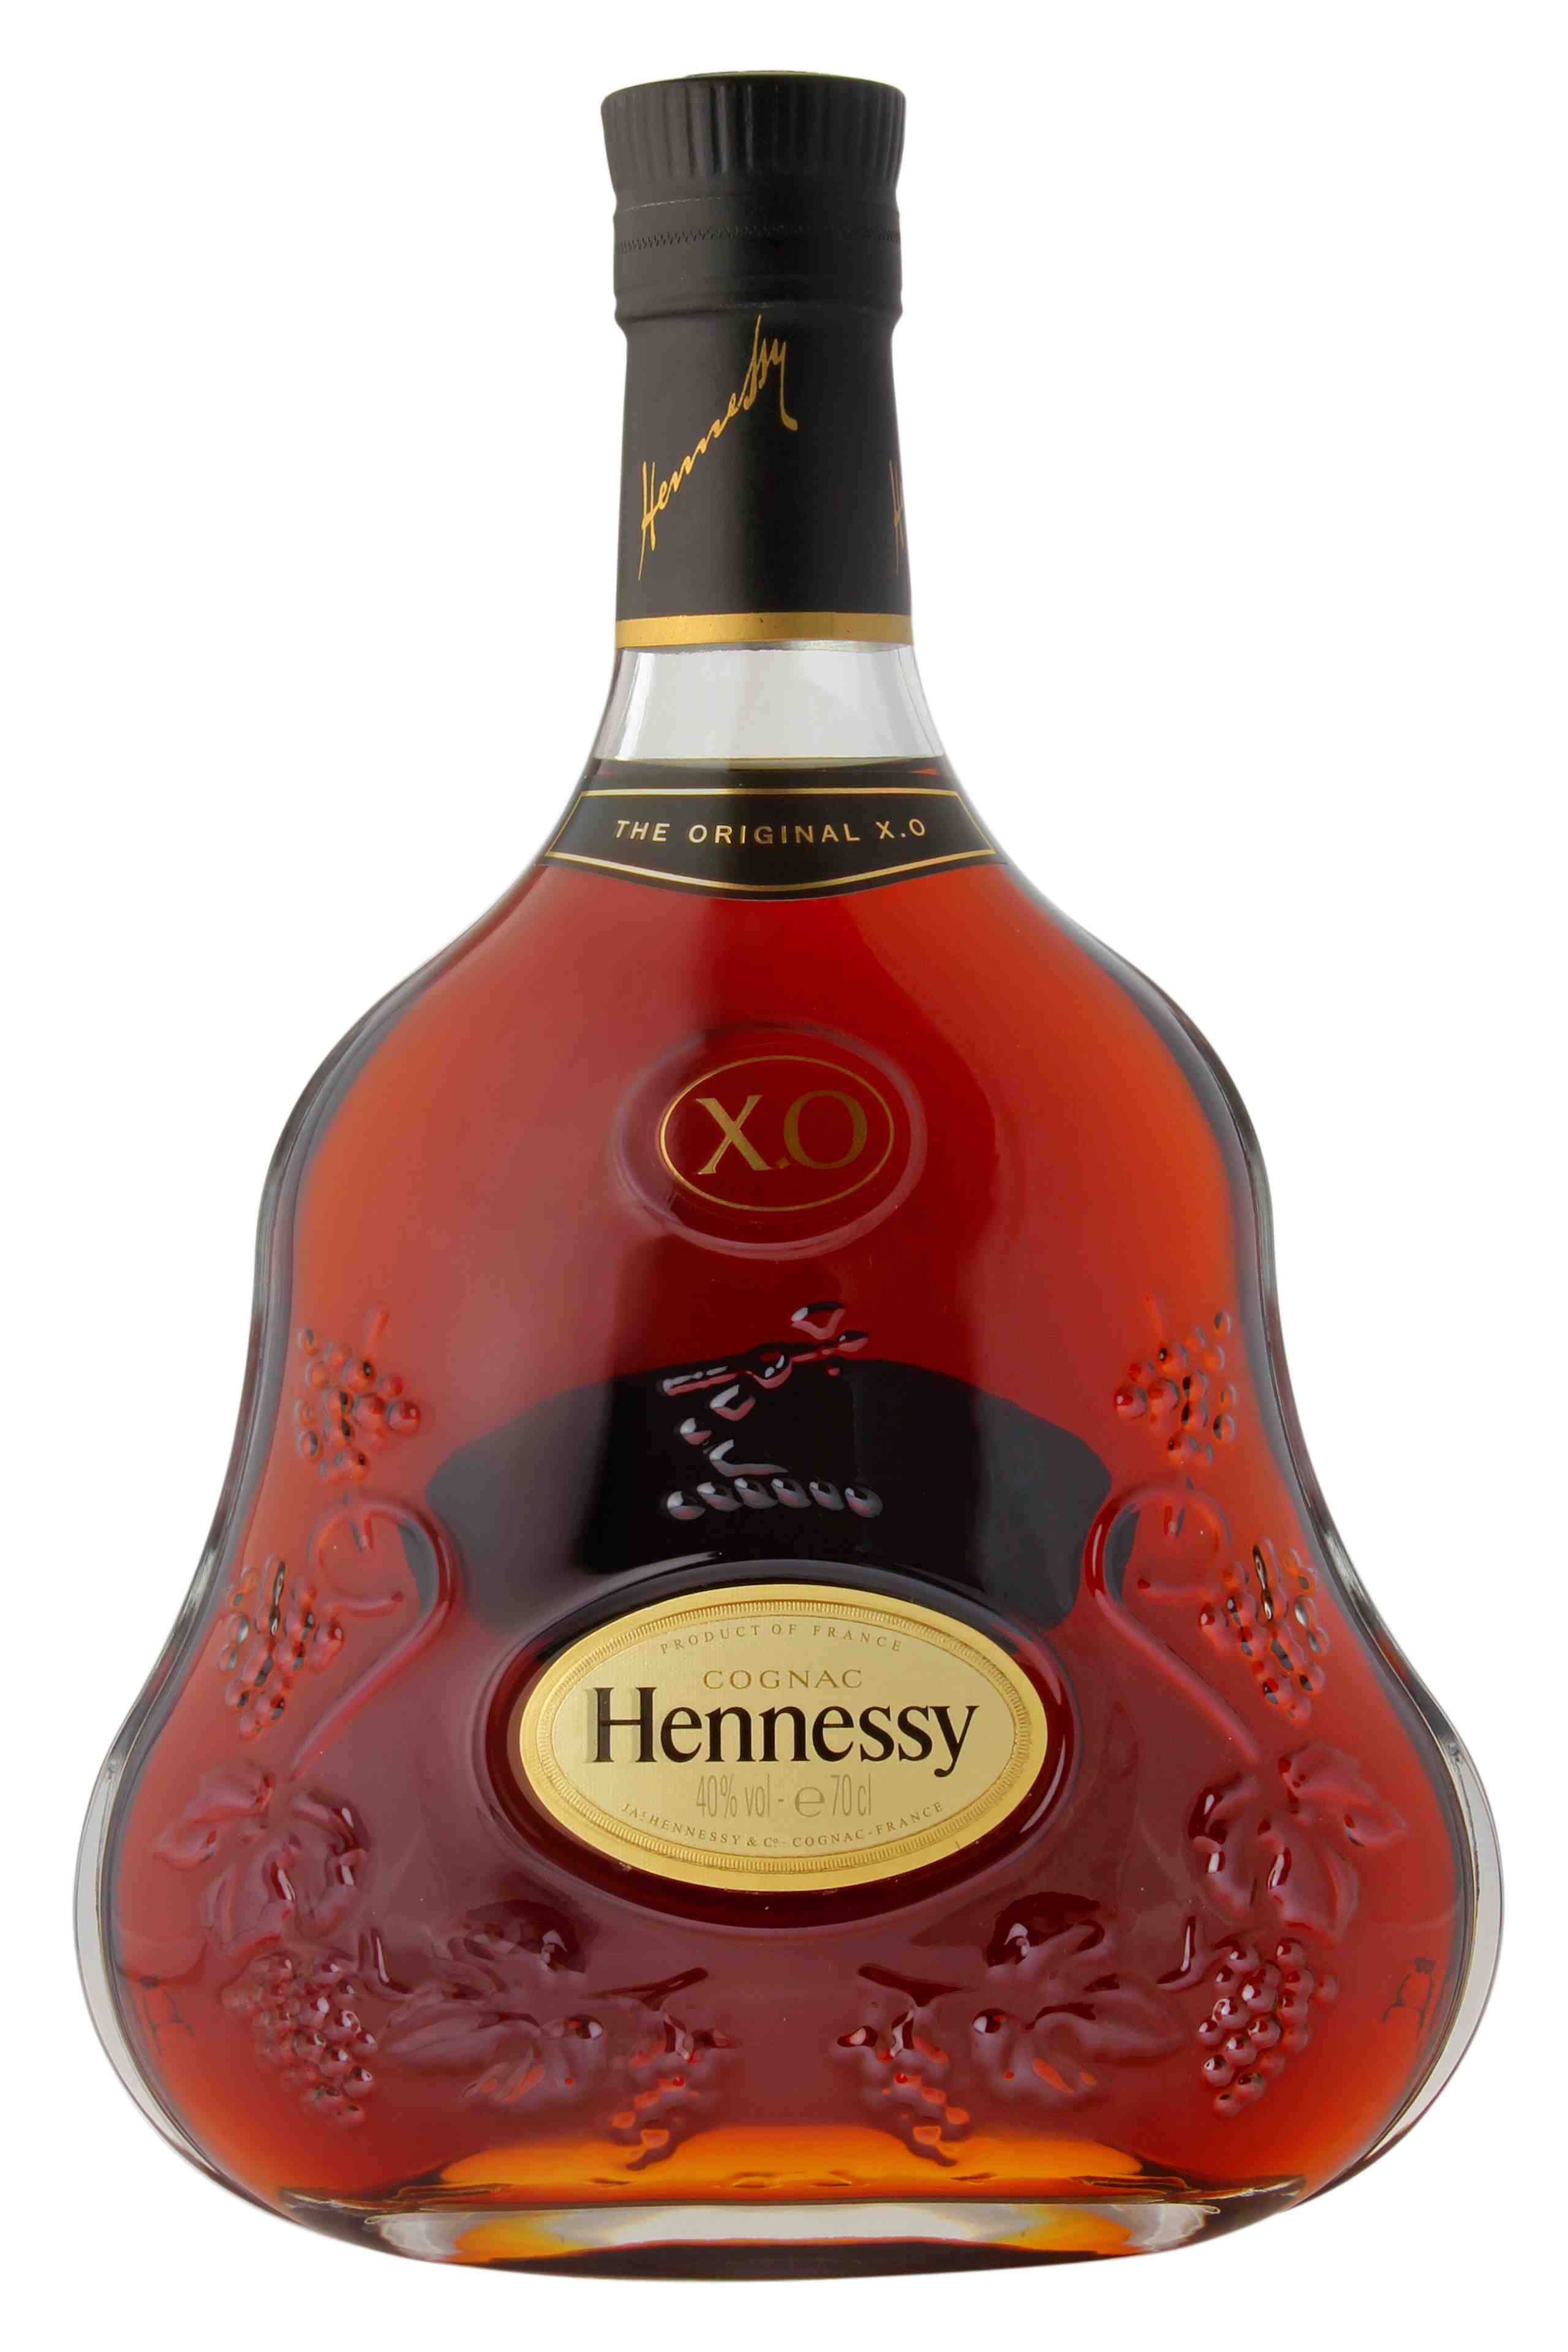 Hennessy Xo Price And Cognac Review Of This Extra Old Brandy Cognac Expert